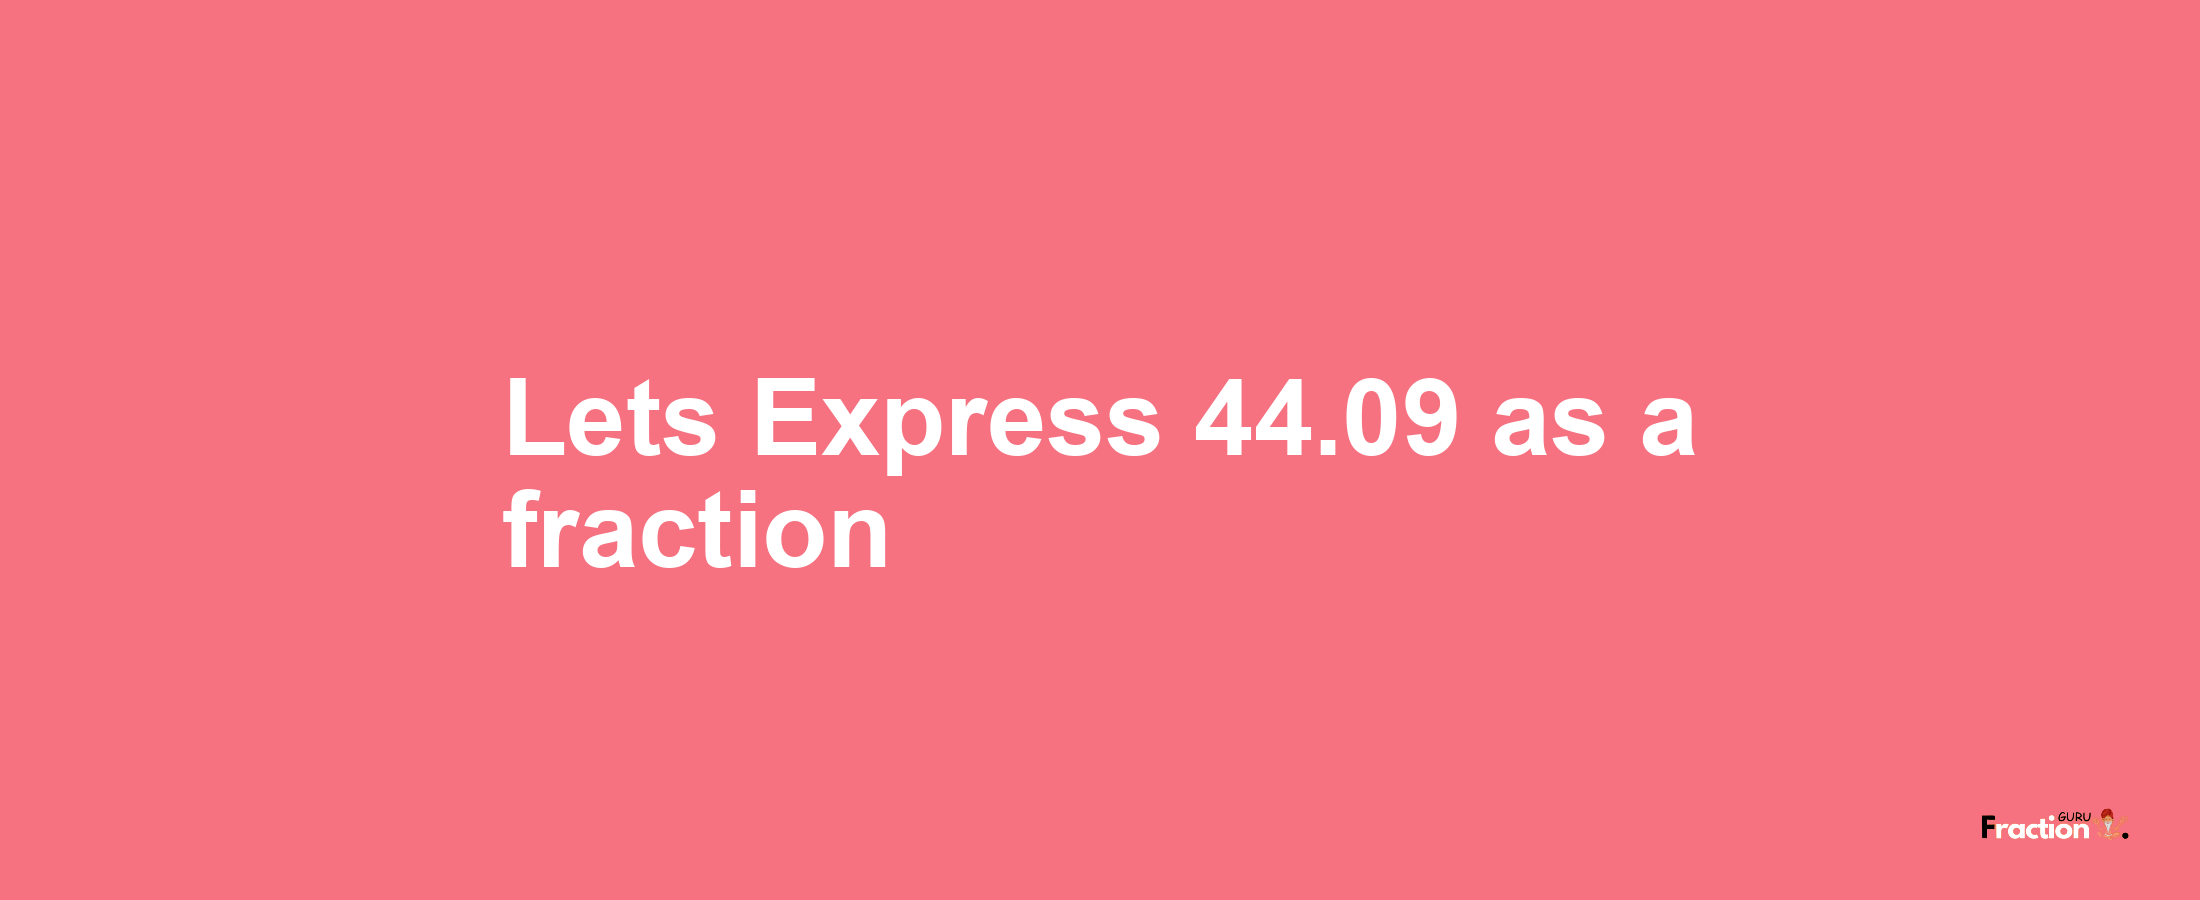 Lets Express 44.09 as afraction